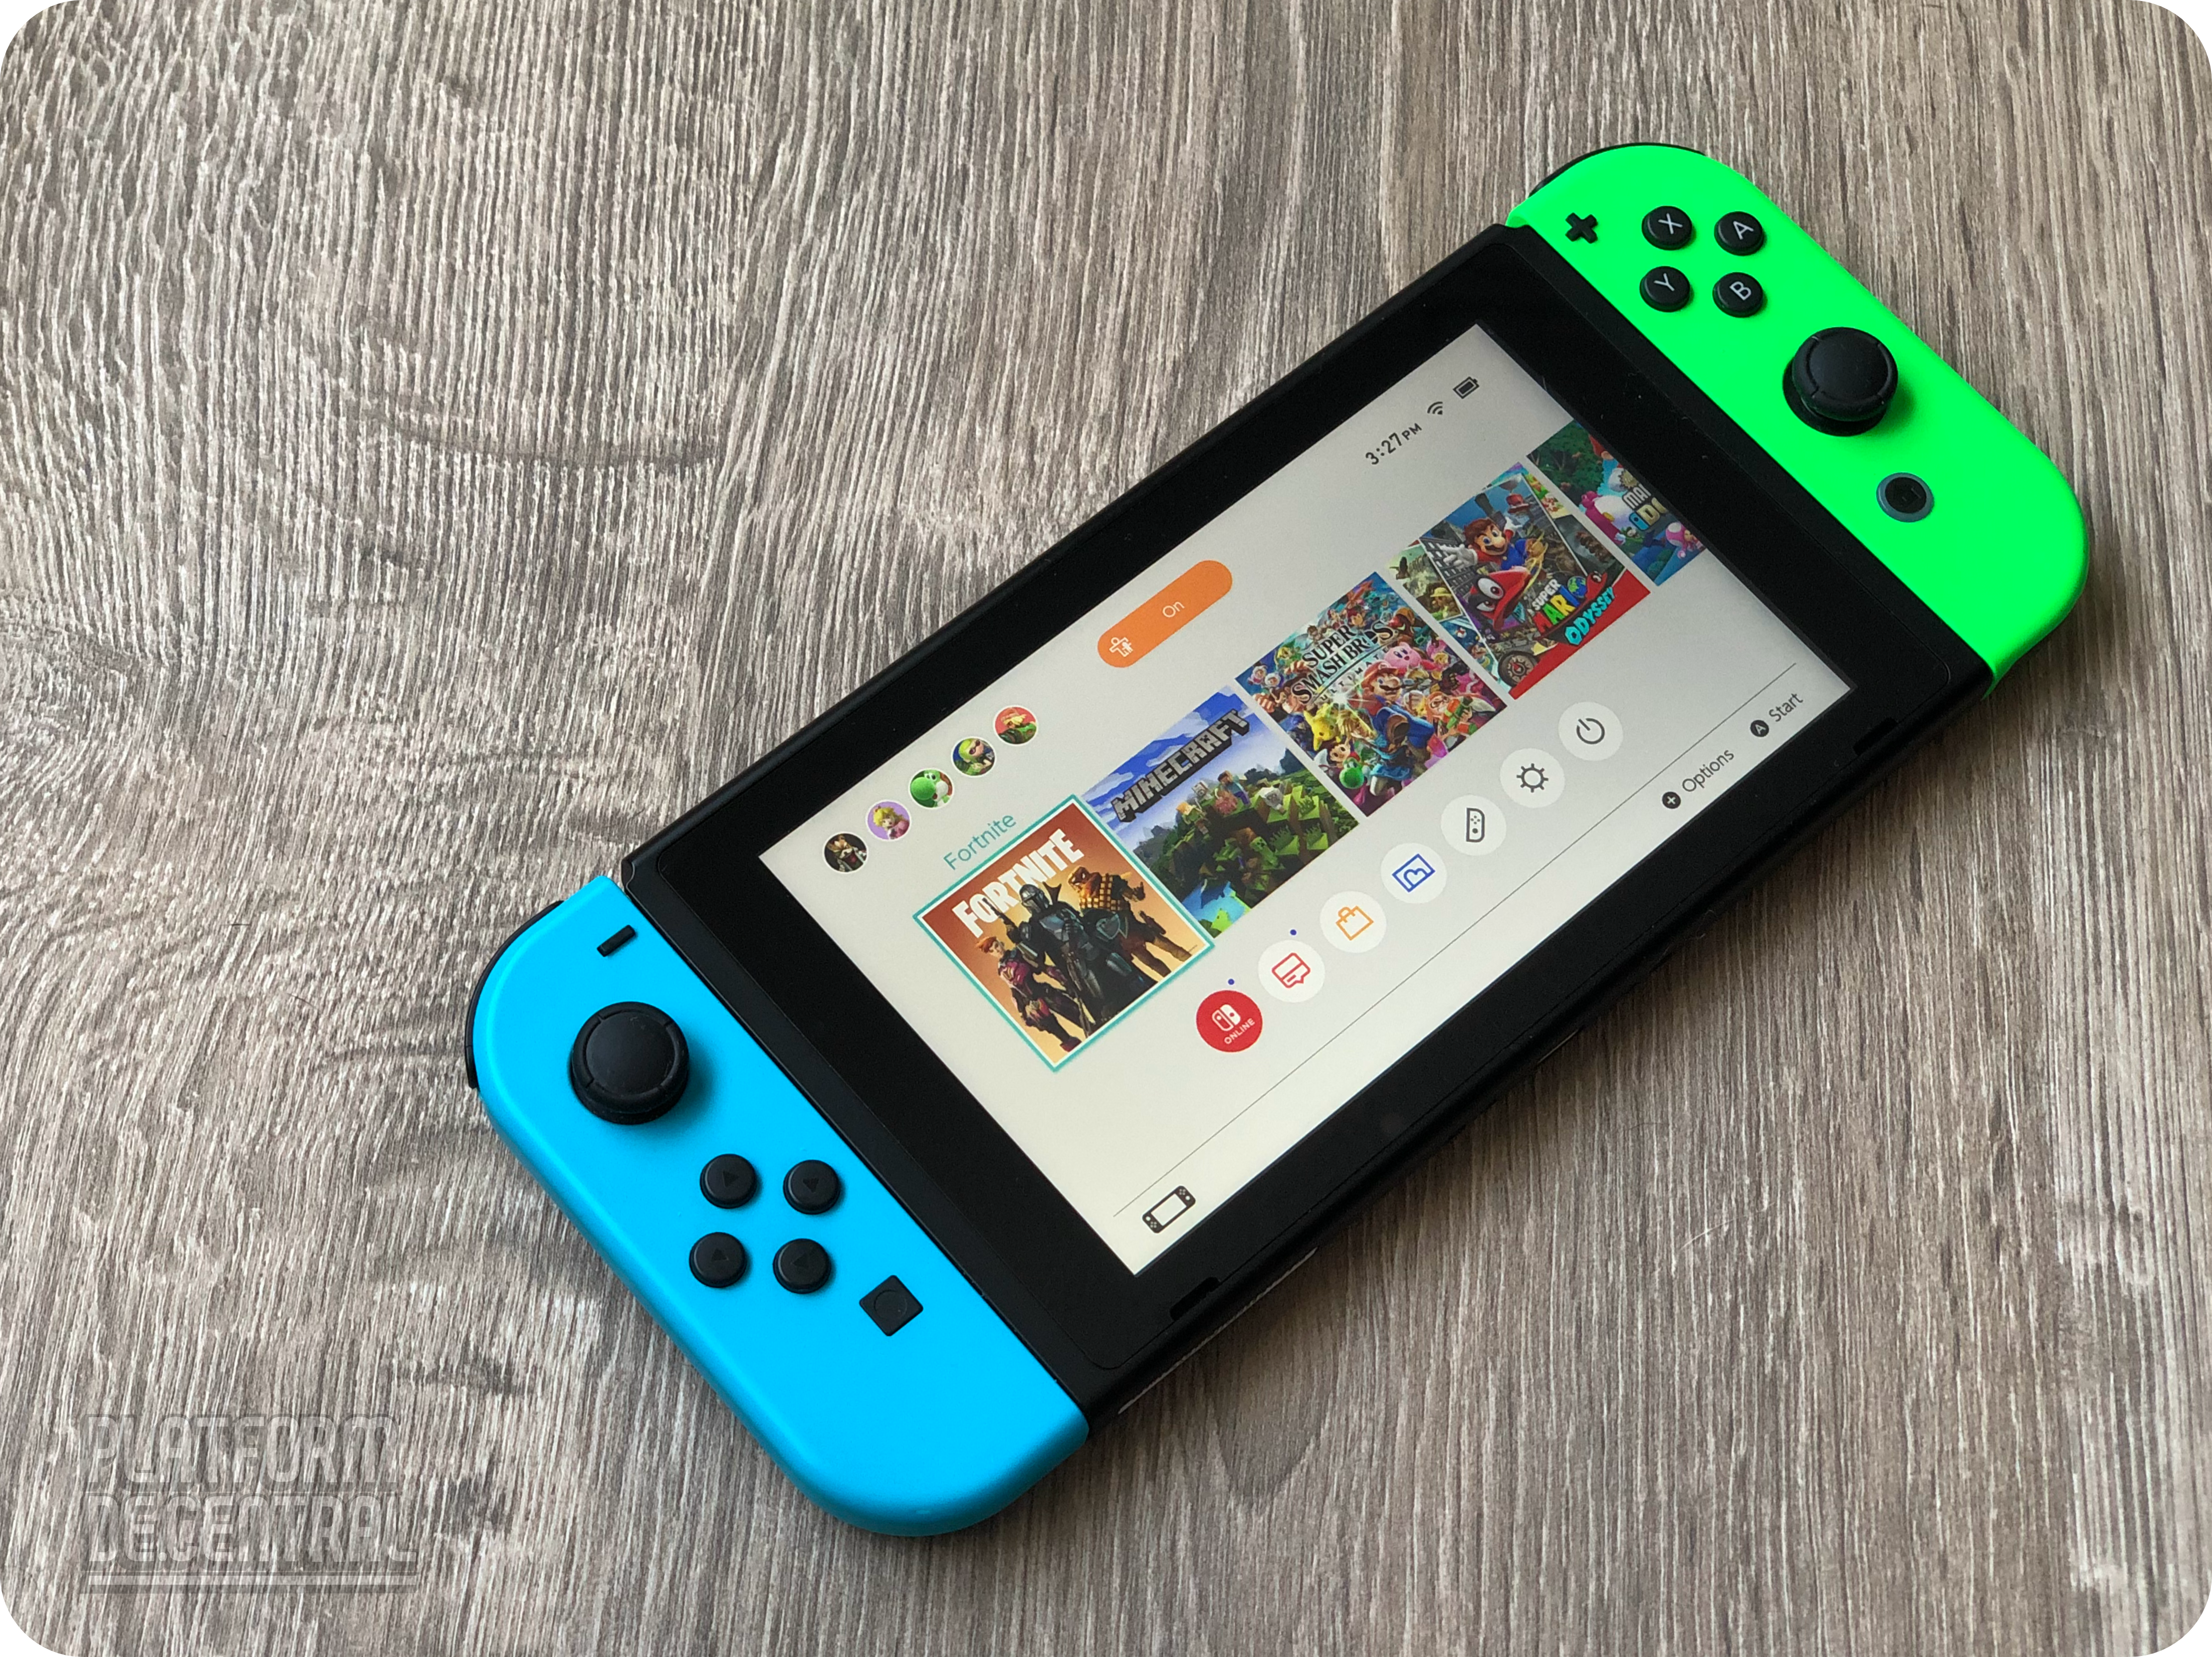 The new 7-inch Nintendo Switch reportedly uses new Nvidia chip with DLSS support